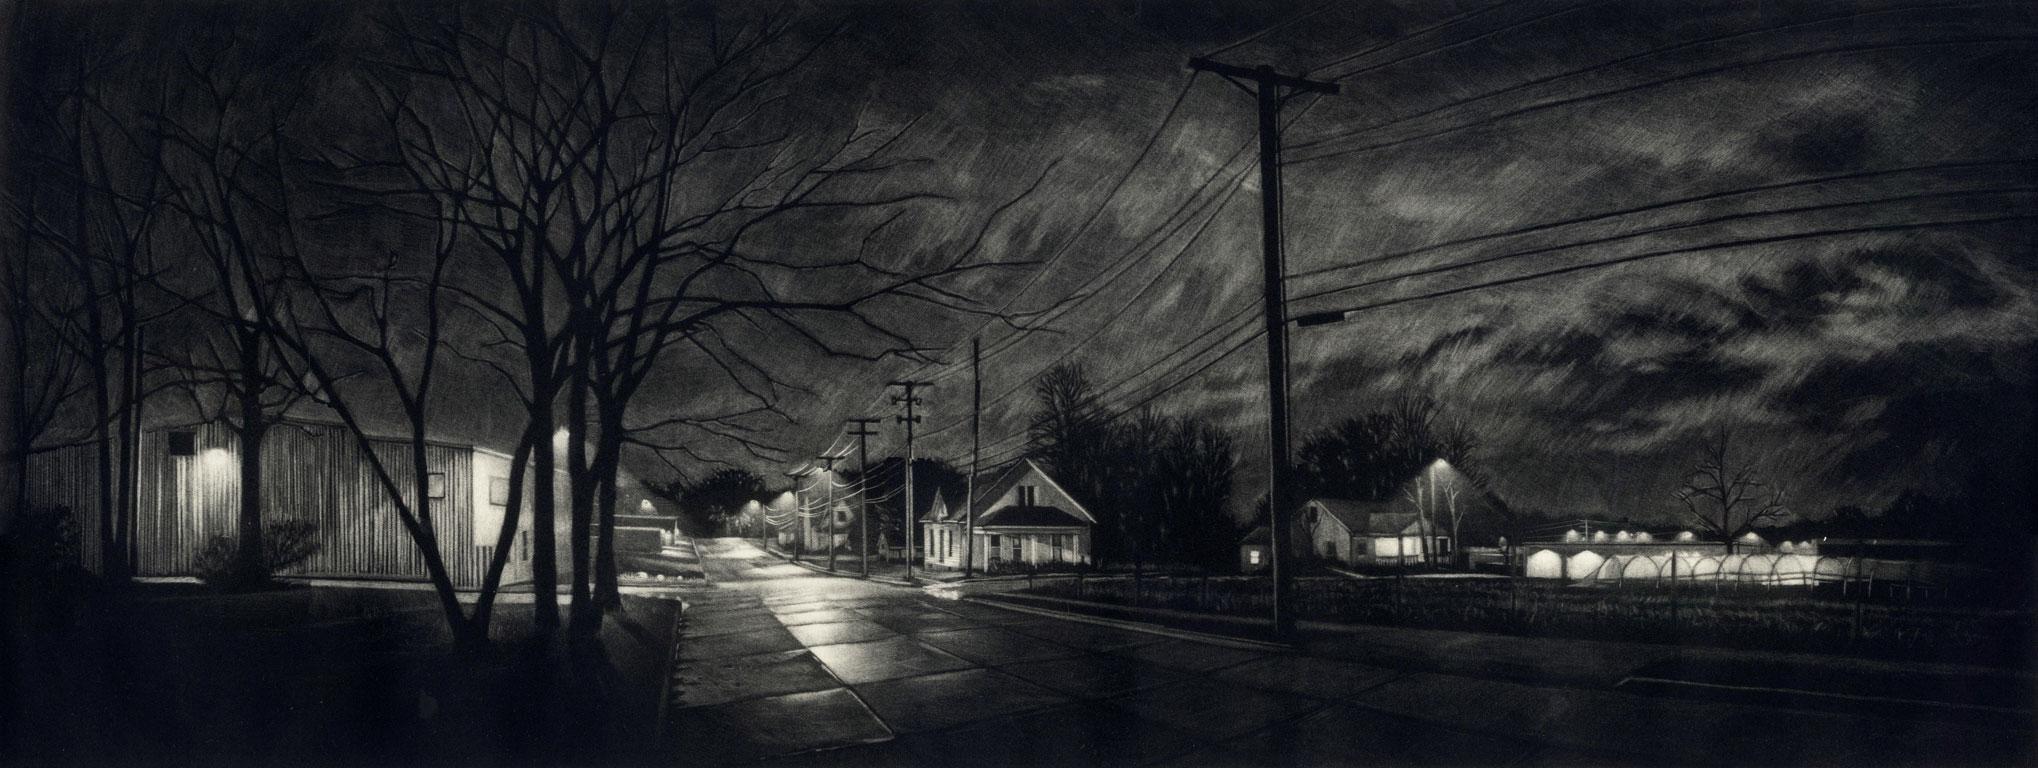 Jacob Crook Print - Gathering Storm (Storm Clouds Near Smith and Fay Streets in Columbia, Missouri)